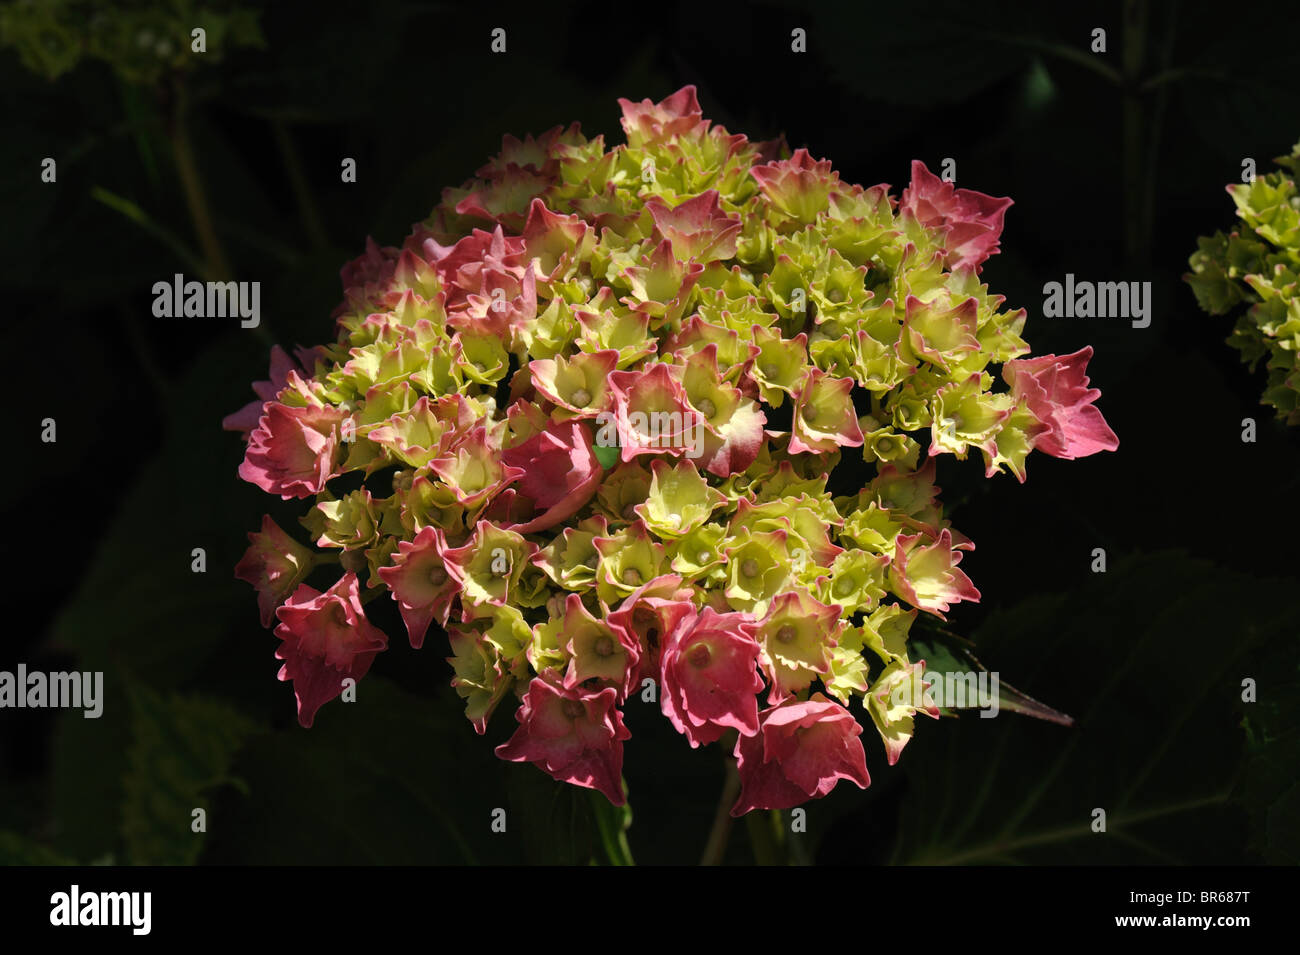 Red Hydrangea macrophylla flower just vcoming into flower and gaining colour Stock Photo